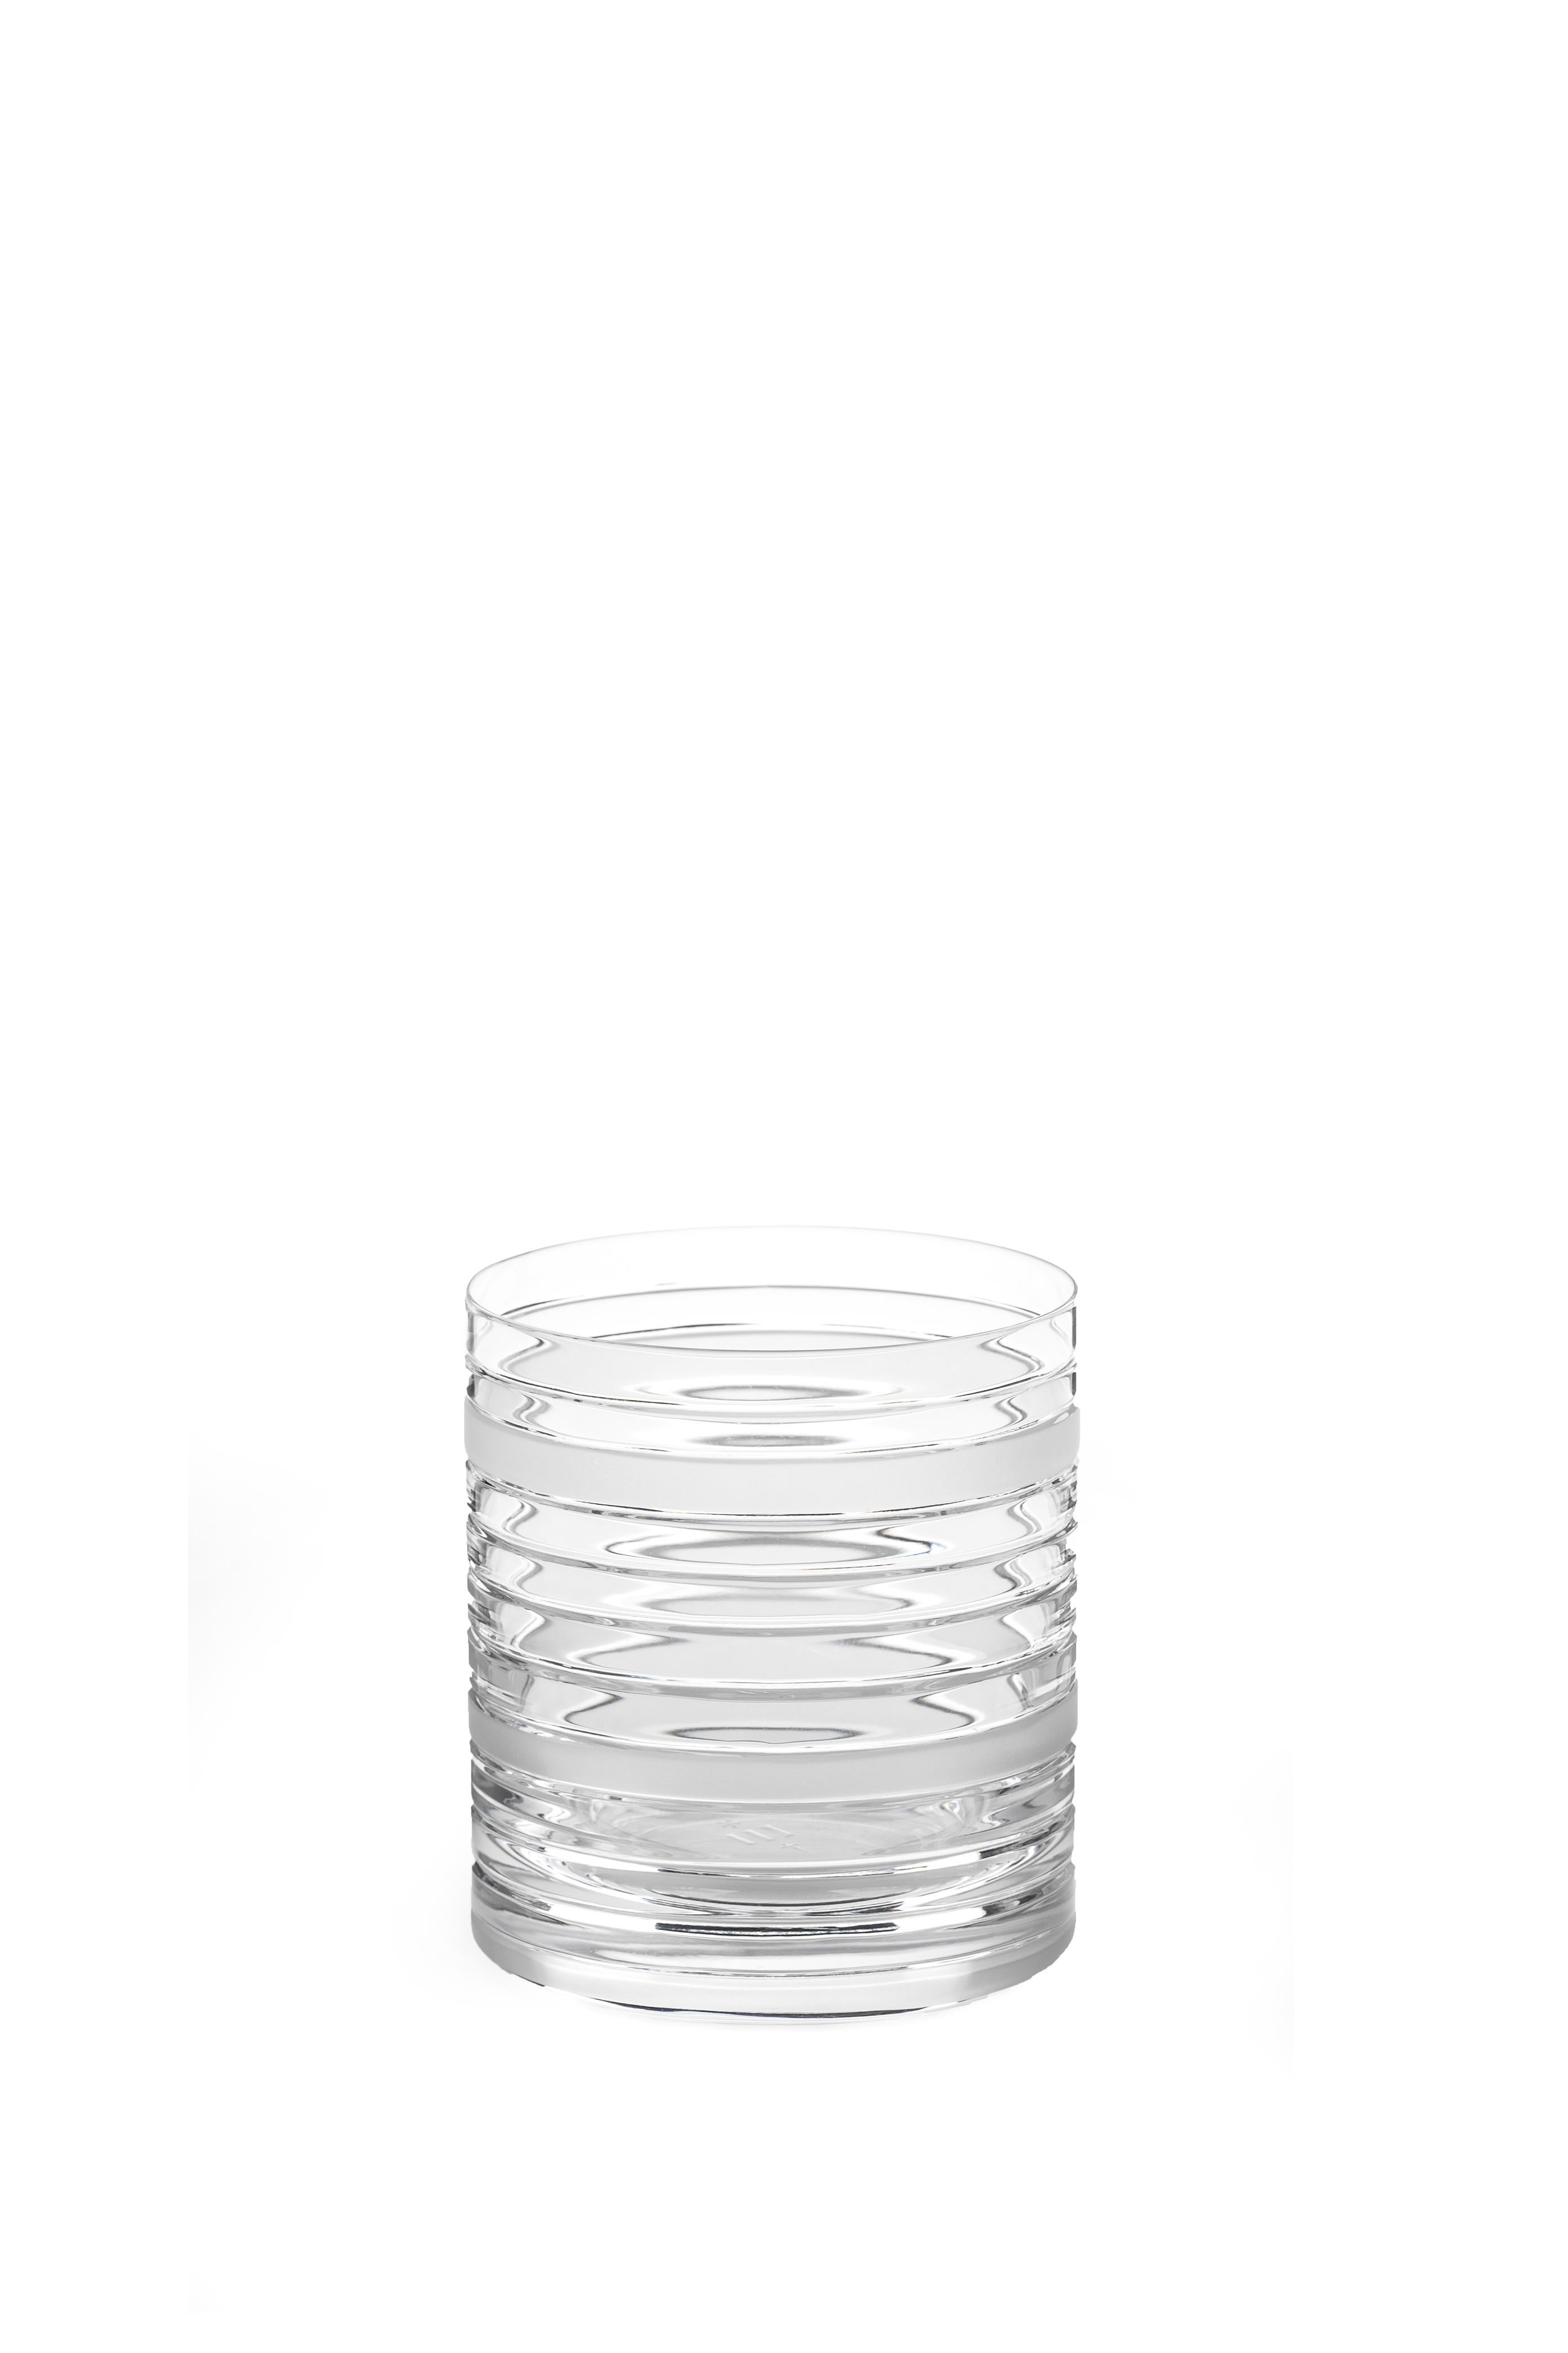 A heavy tumbler glass made by hand. 
A glass designed by Scholten & Baijings as part of our 'ELEMENTS' series.

The Collection: Elements
A rich canon of graphic markings defines the ELEMENTS series of lead crystal. Cuts and textures of varying